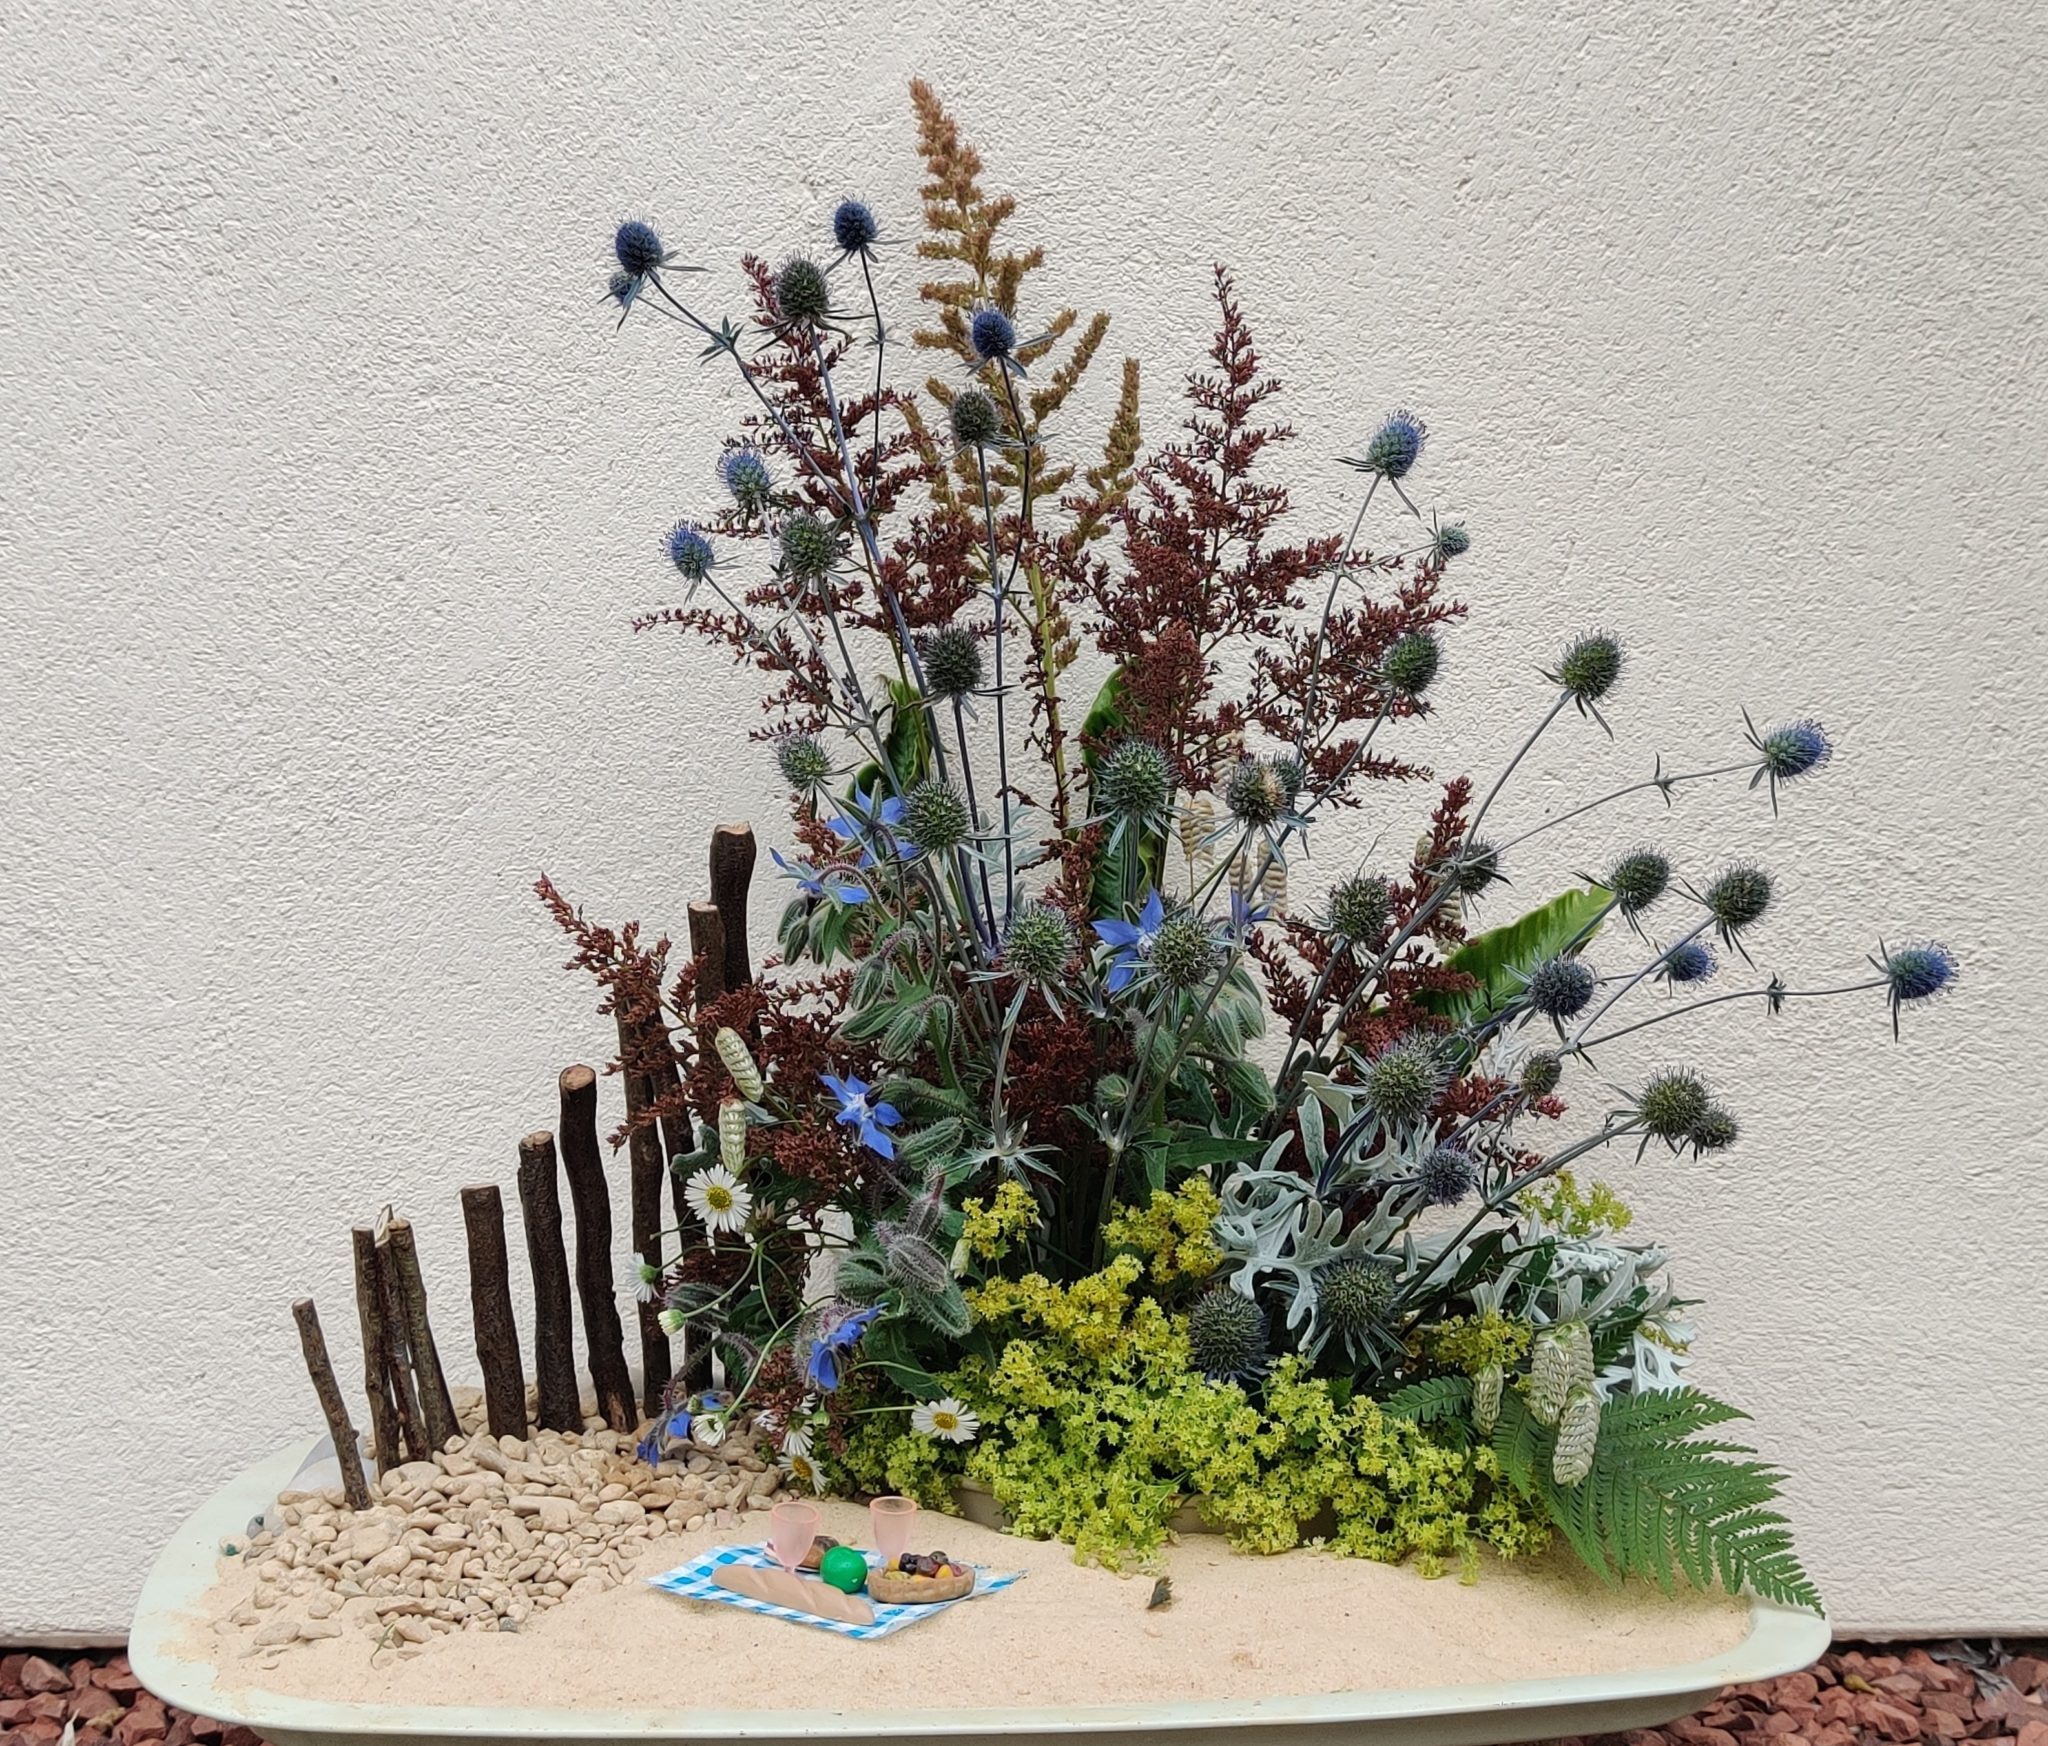 1st in Area comp
Joint 2nd in National comp
 Madeleine Havell Gillingham Flower Club
A Picnic on the Beach